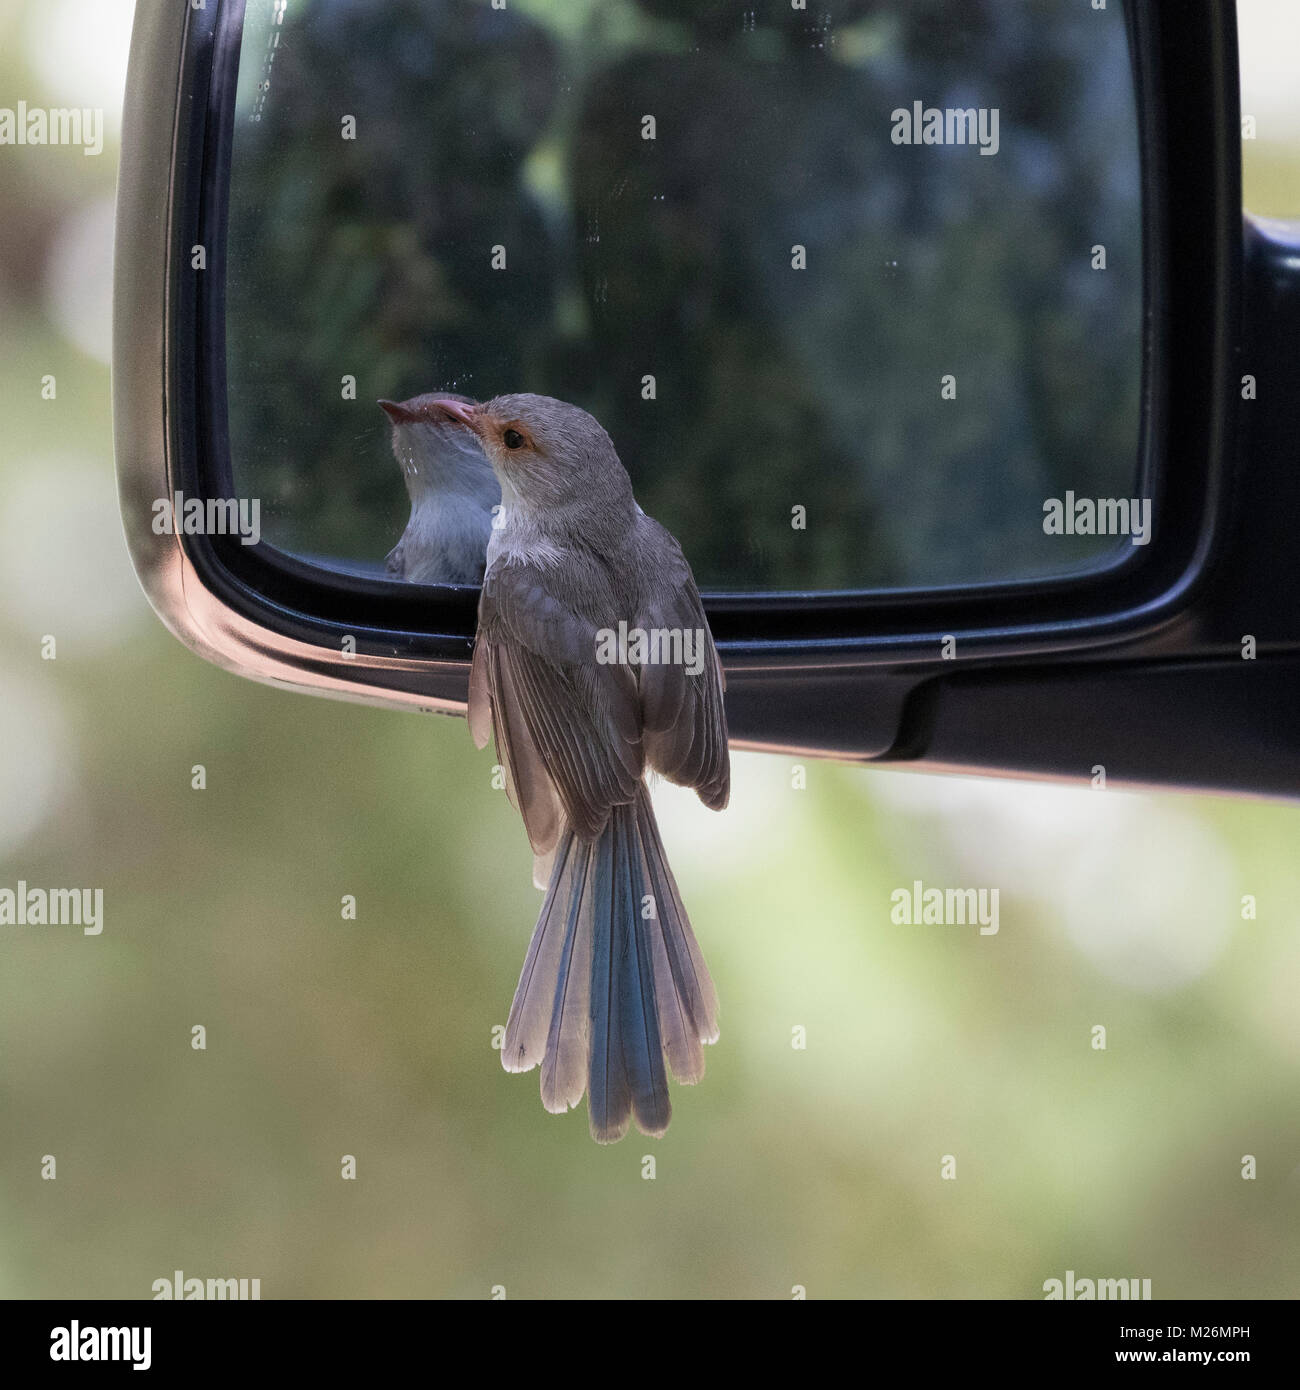 Chipping Sparrow (Attacking Its Own Reflection in a Car Mirror)